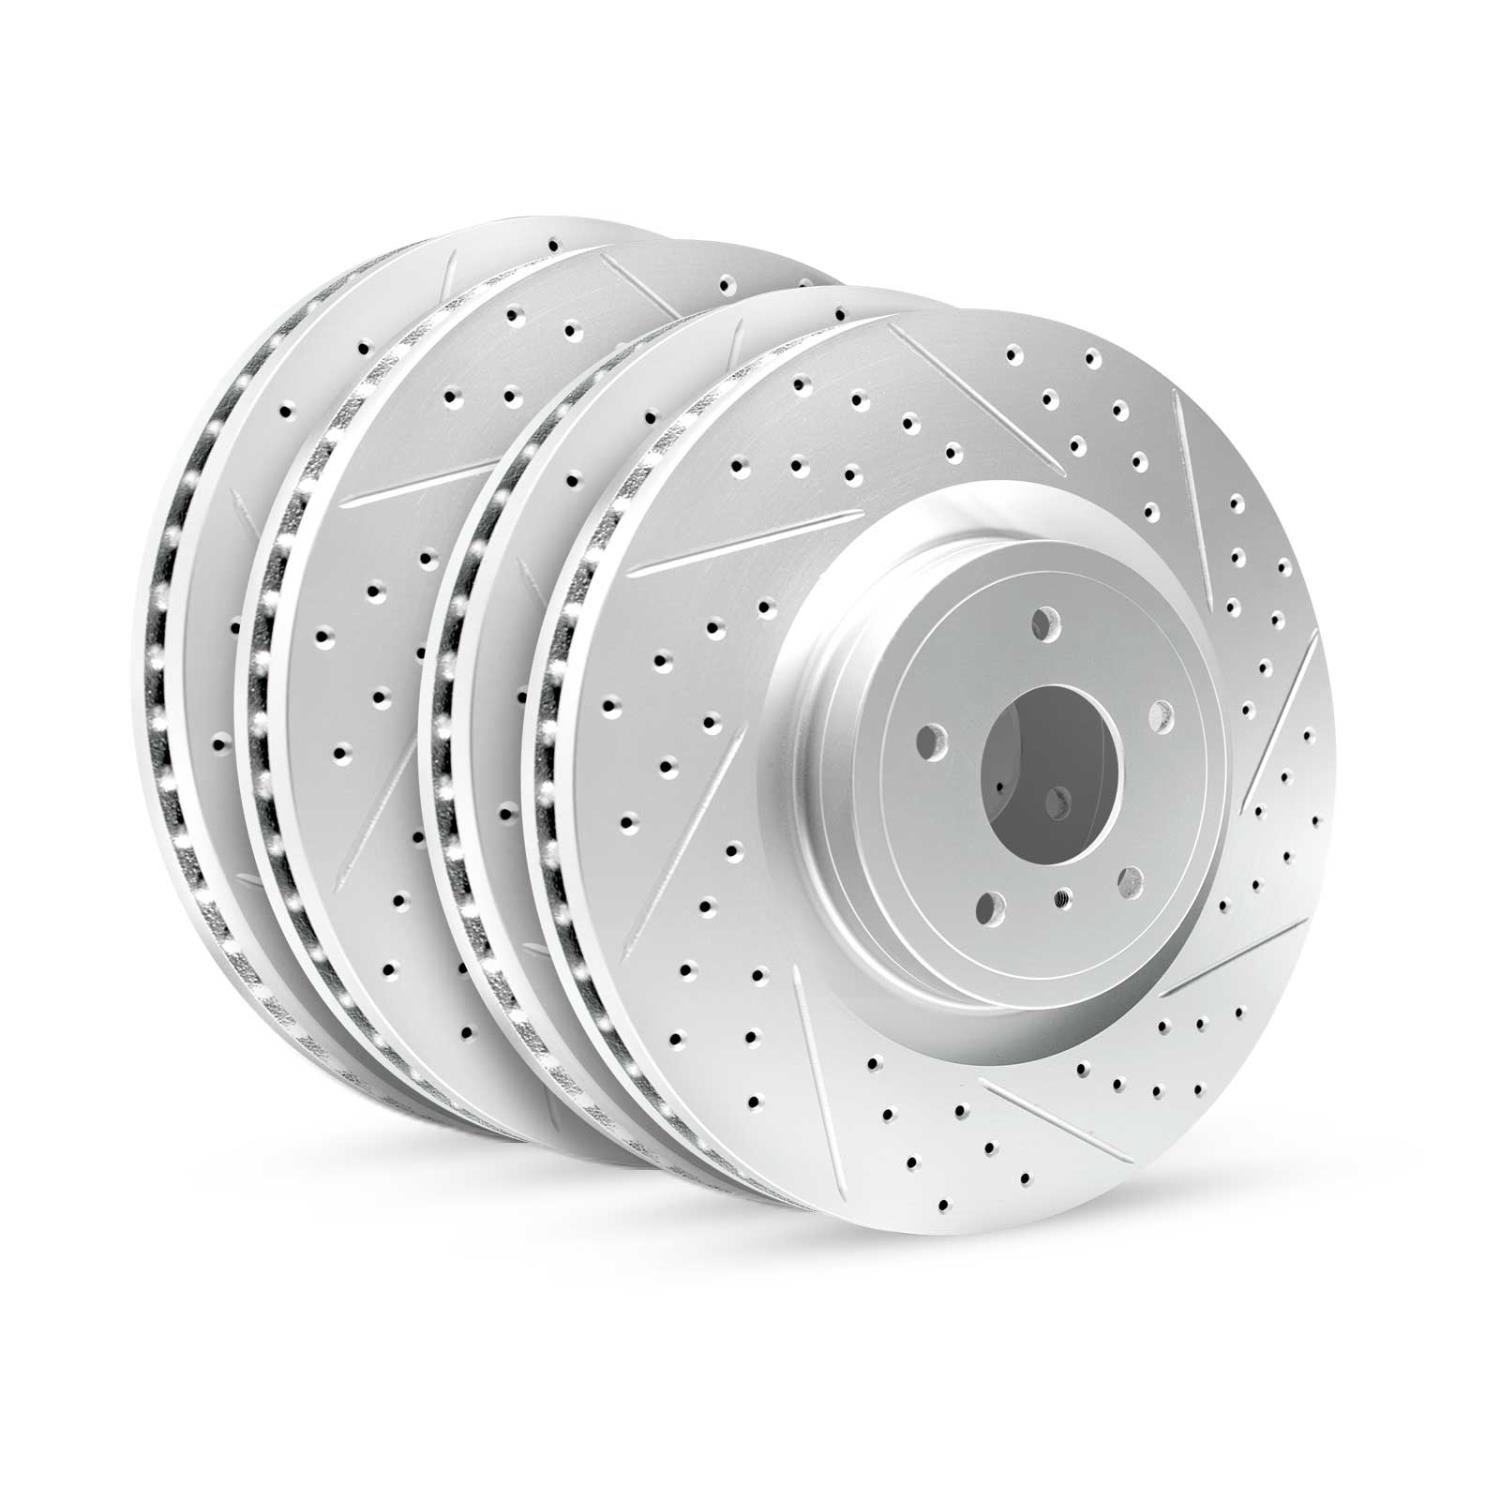 GEO-Carbon Drilled/Slotted Rotors, 1990-2003 Ford/Mazda, Position: Front/Rear